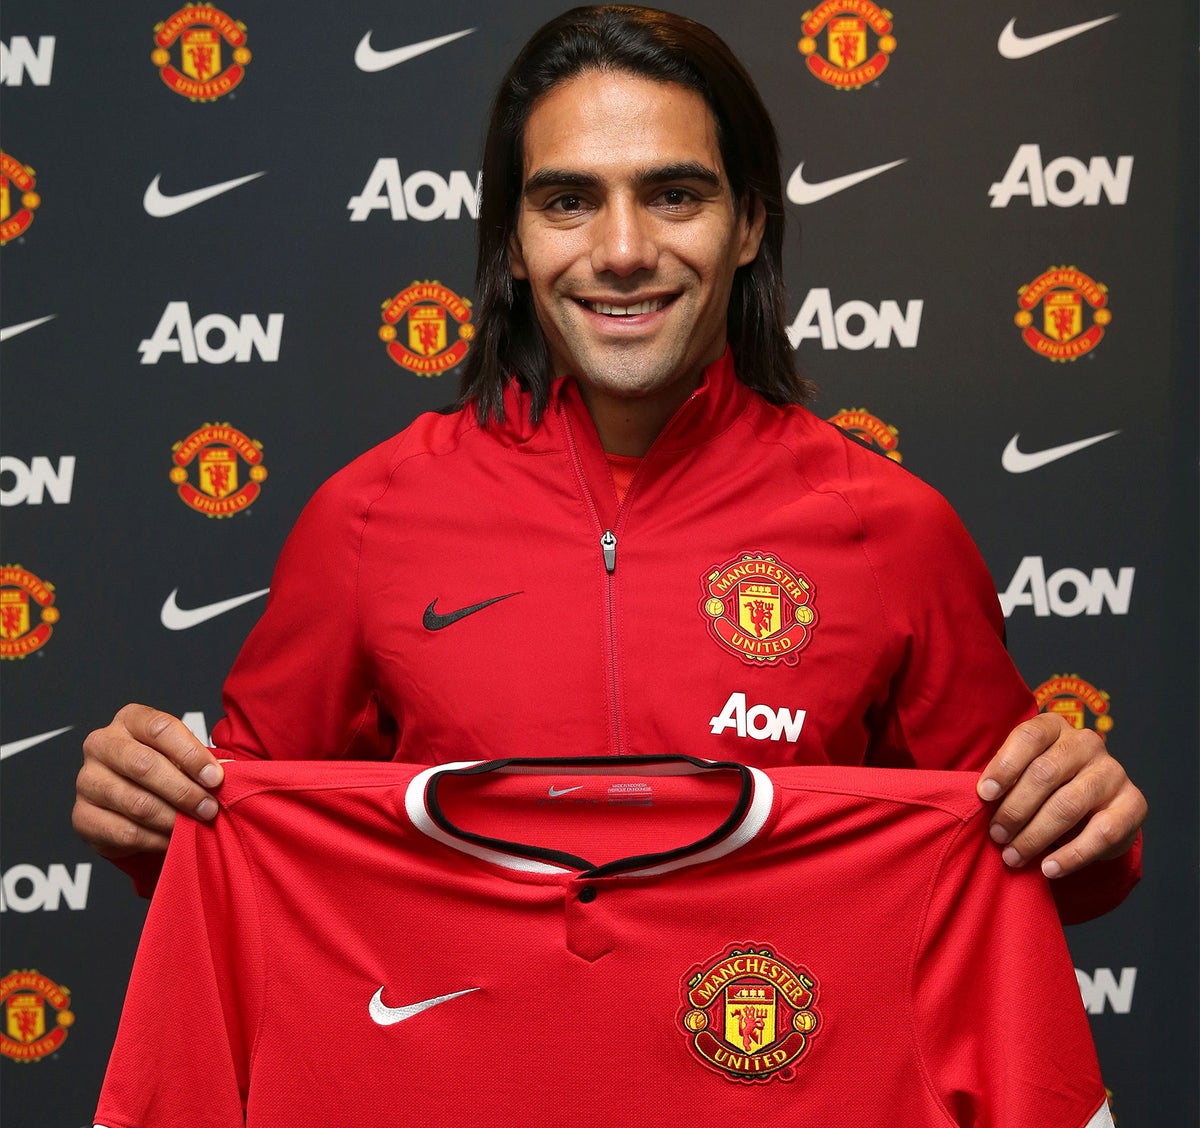 Radamel Falcao S Journey From Teenage Debutant To Manchester United S Star Signing The Independent The Independent